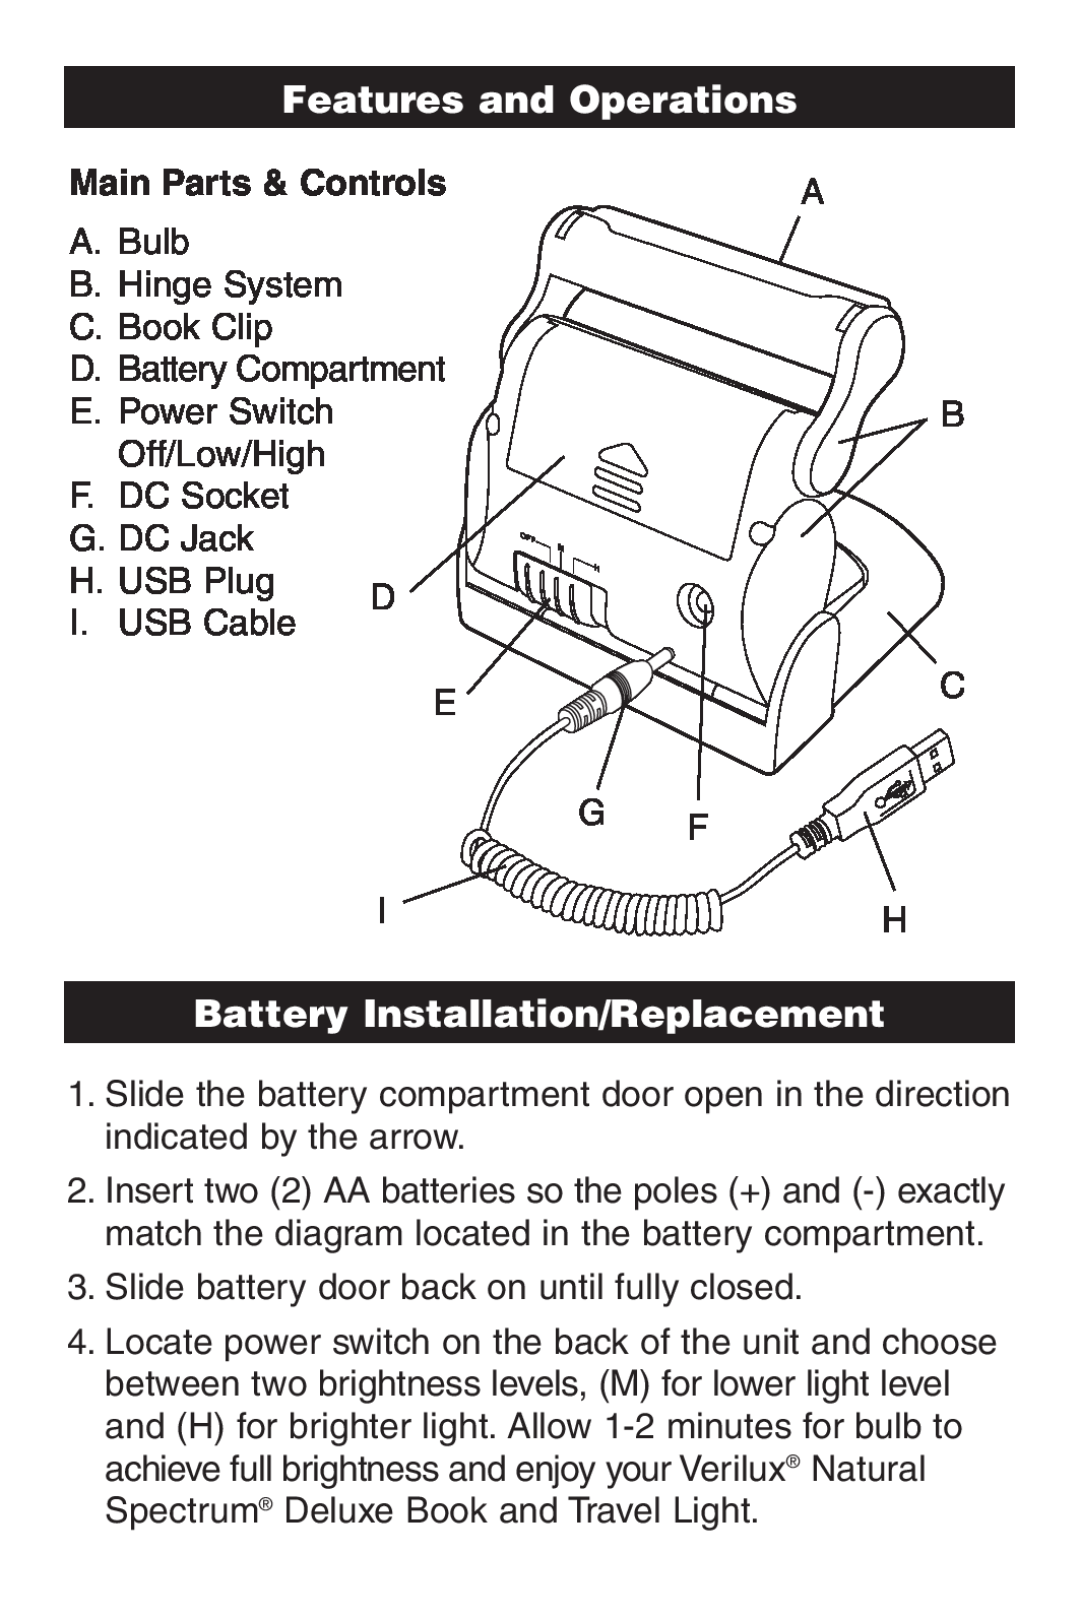 Verilux VB01 manual Features and Operations, Battery Installation/Replacement, Main Parts & Controls 